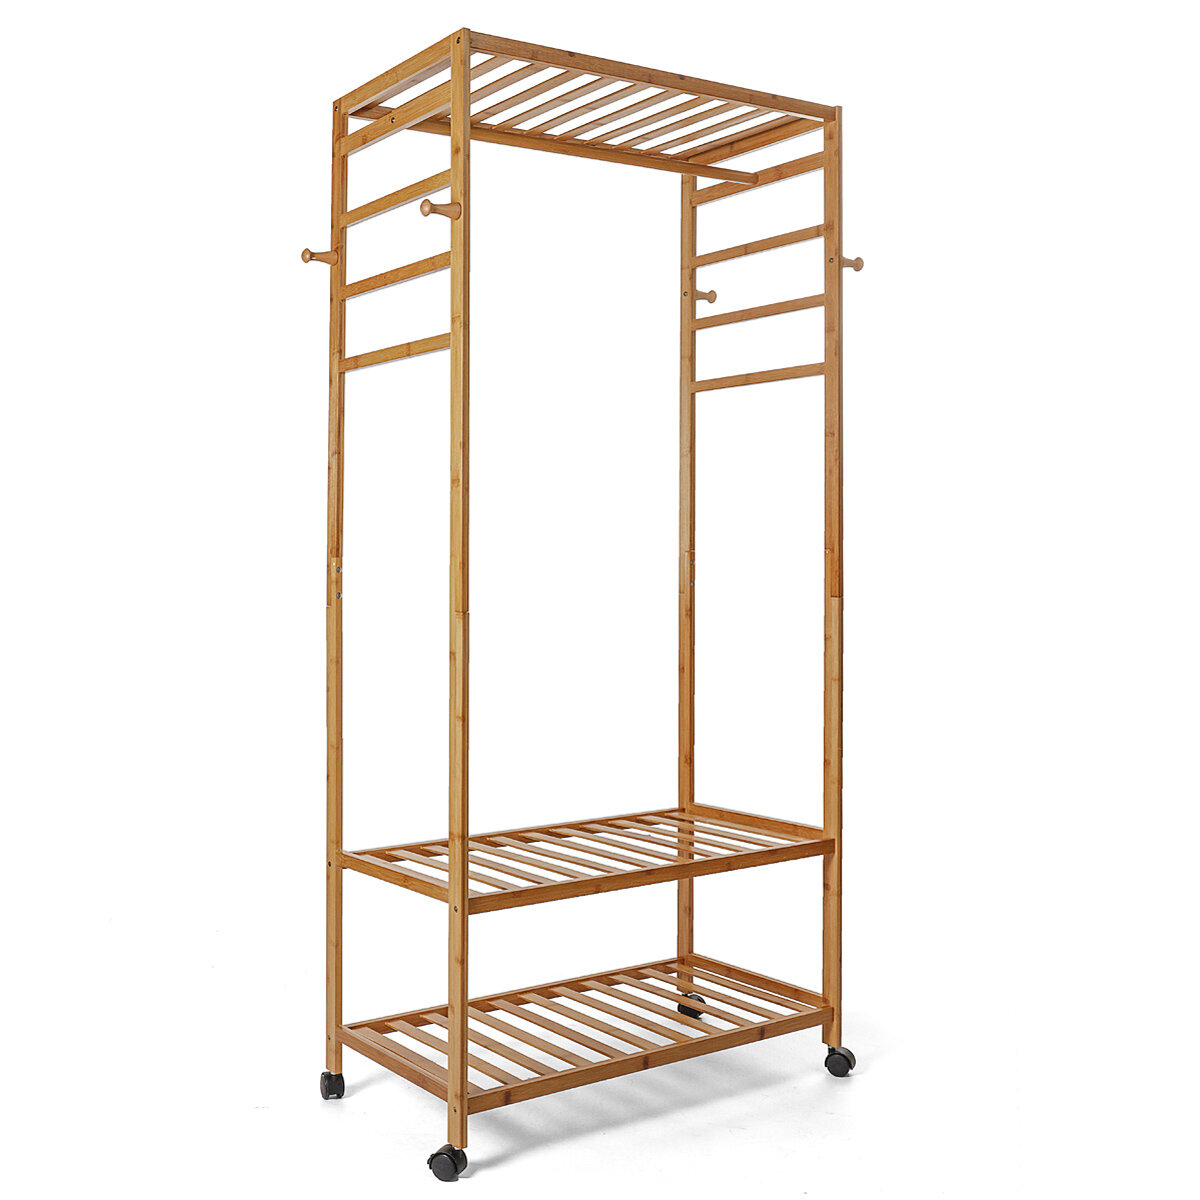 

Wooden Garment Clothes Rack Rail Hat Hanging Coat Rack Shelf Heavy Duty Rolling Stand with 2 Tiers Storage Shelves Books